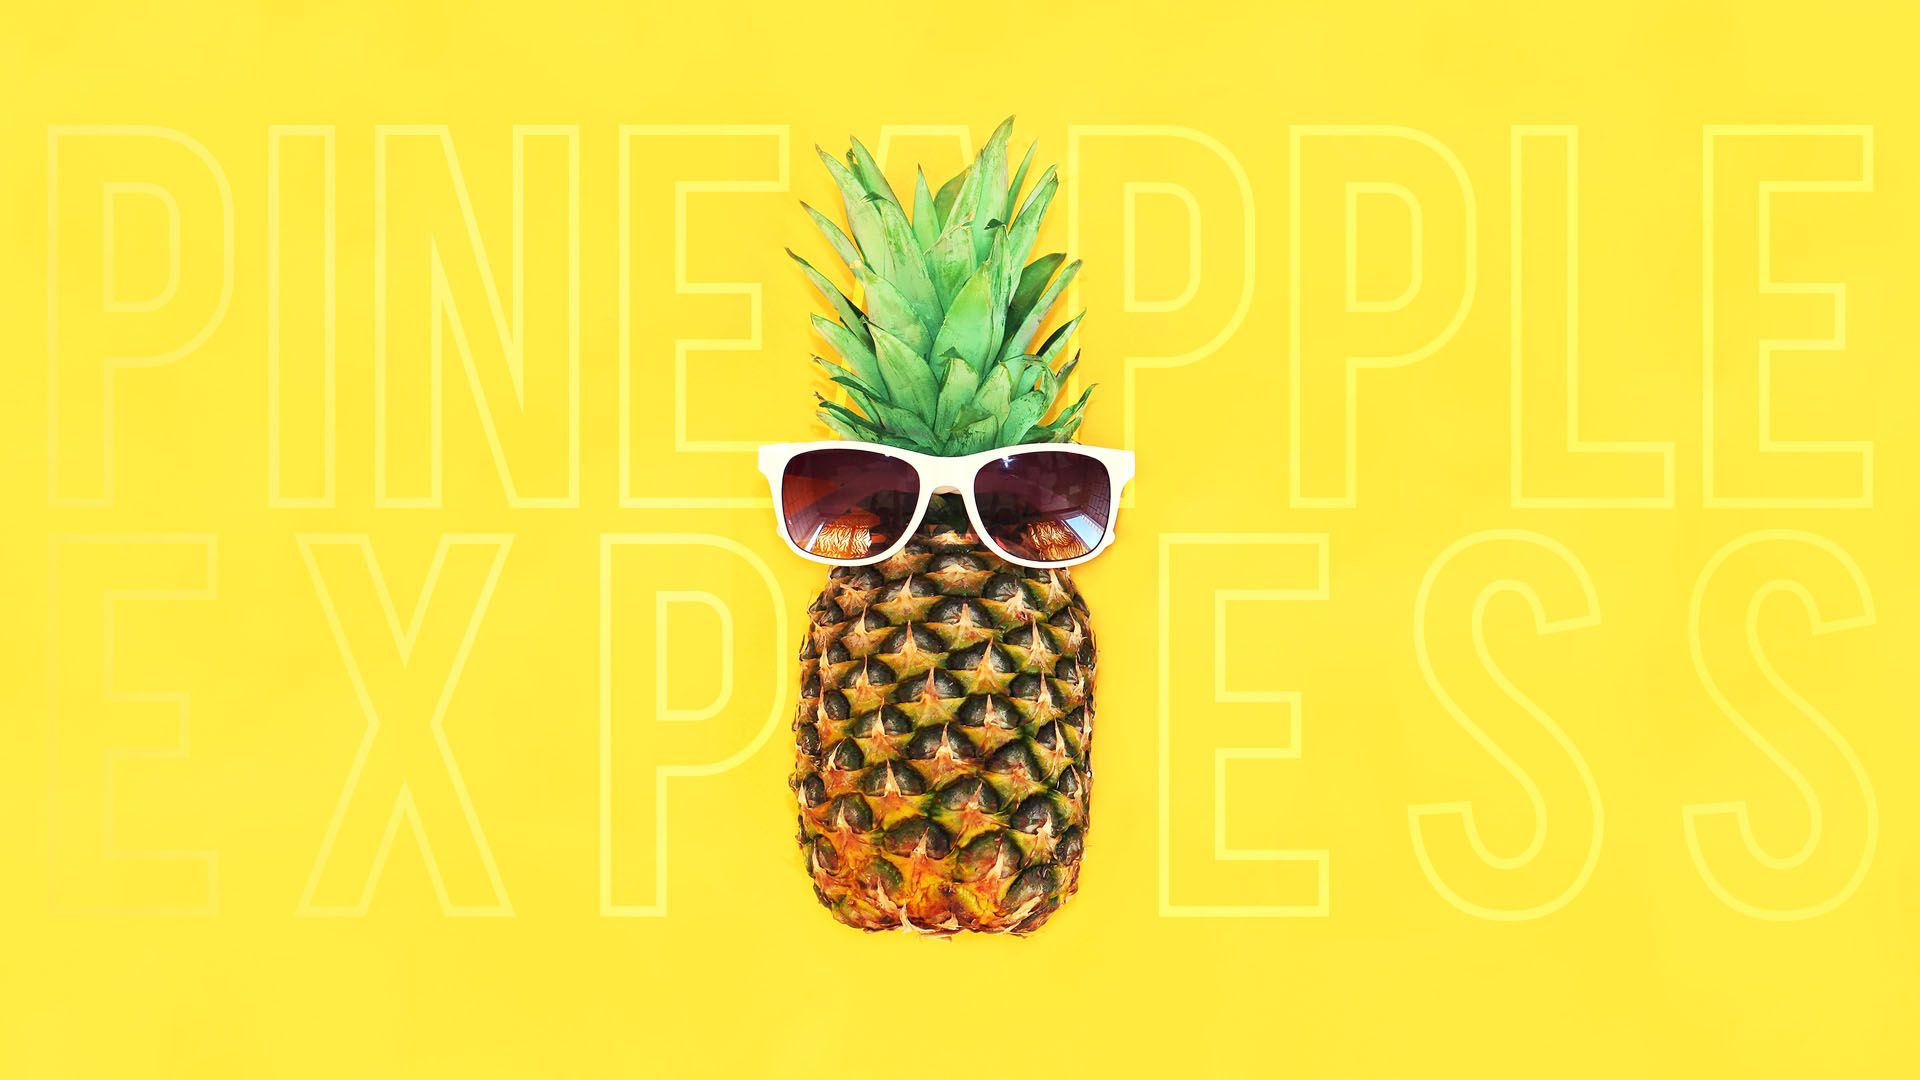 Pineapple Express: Which Came First? Movie or Strain?